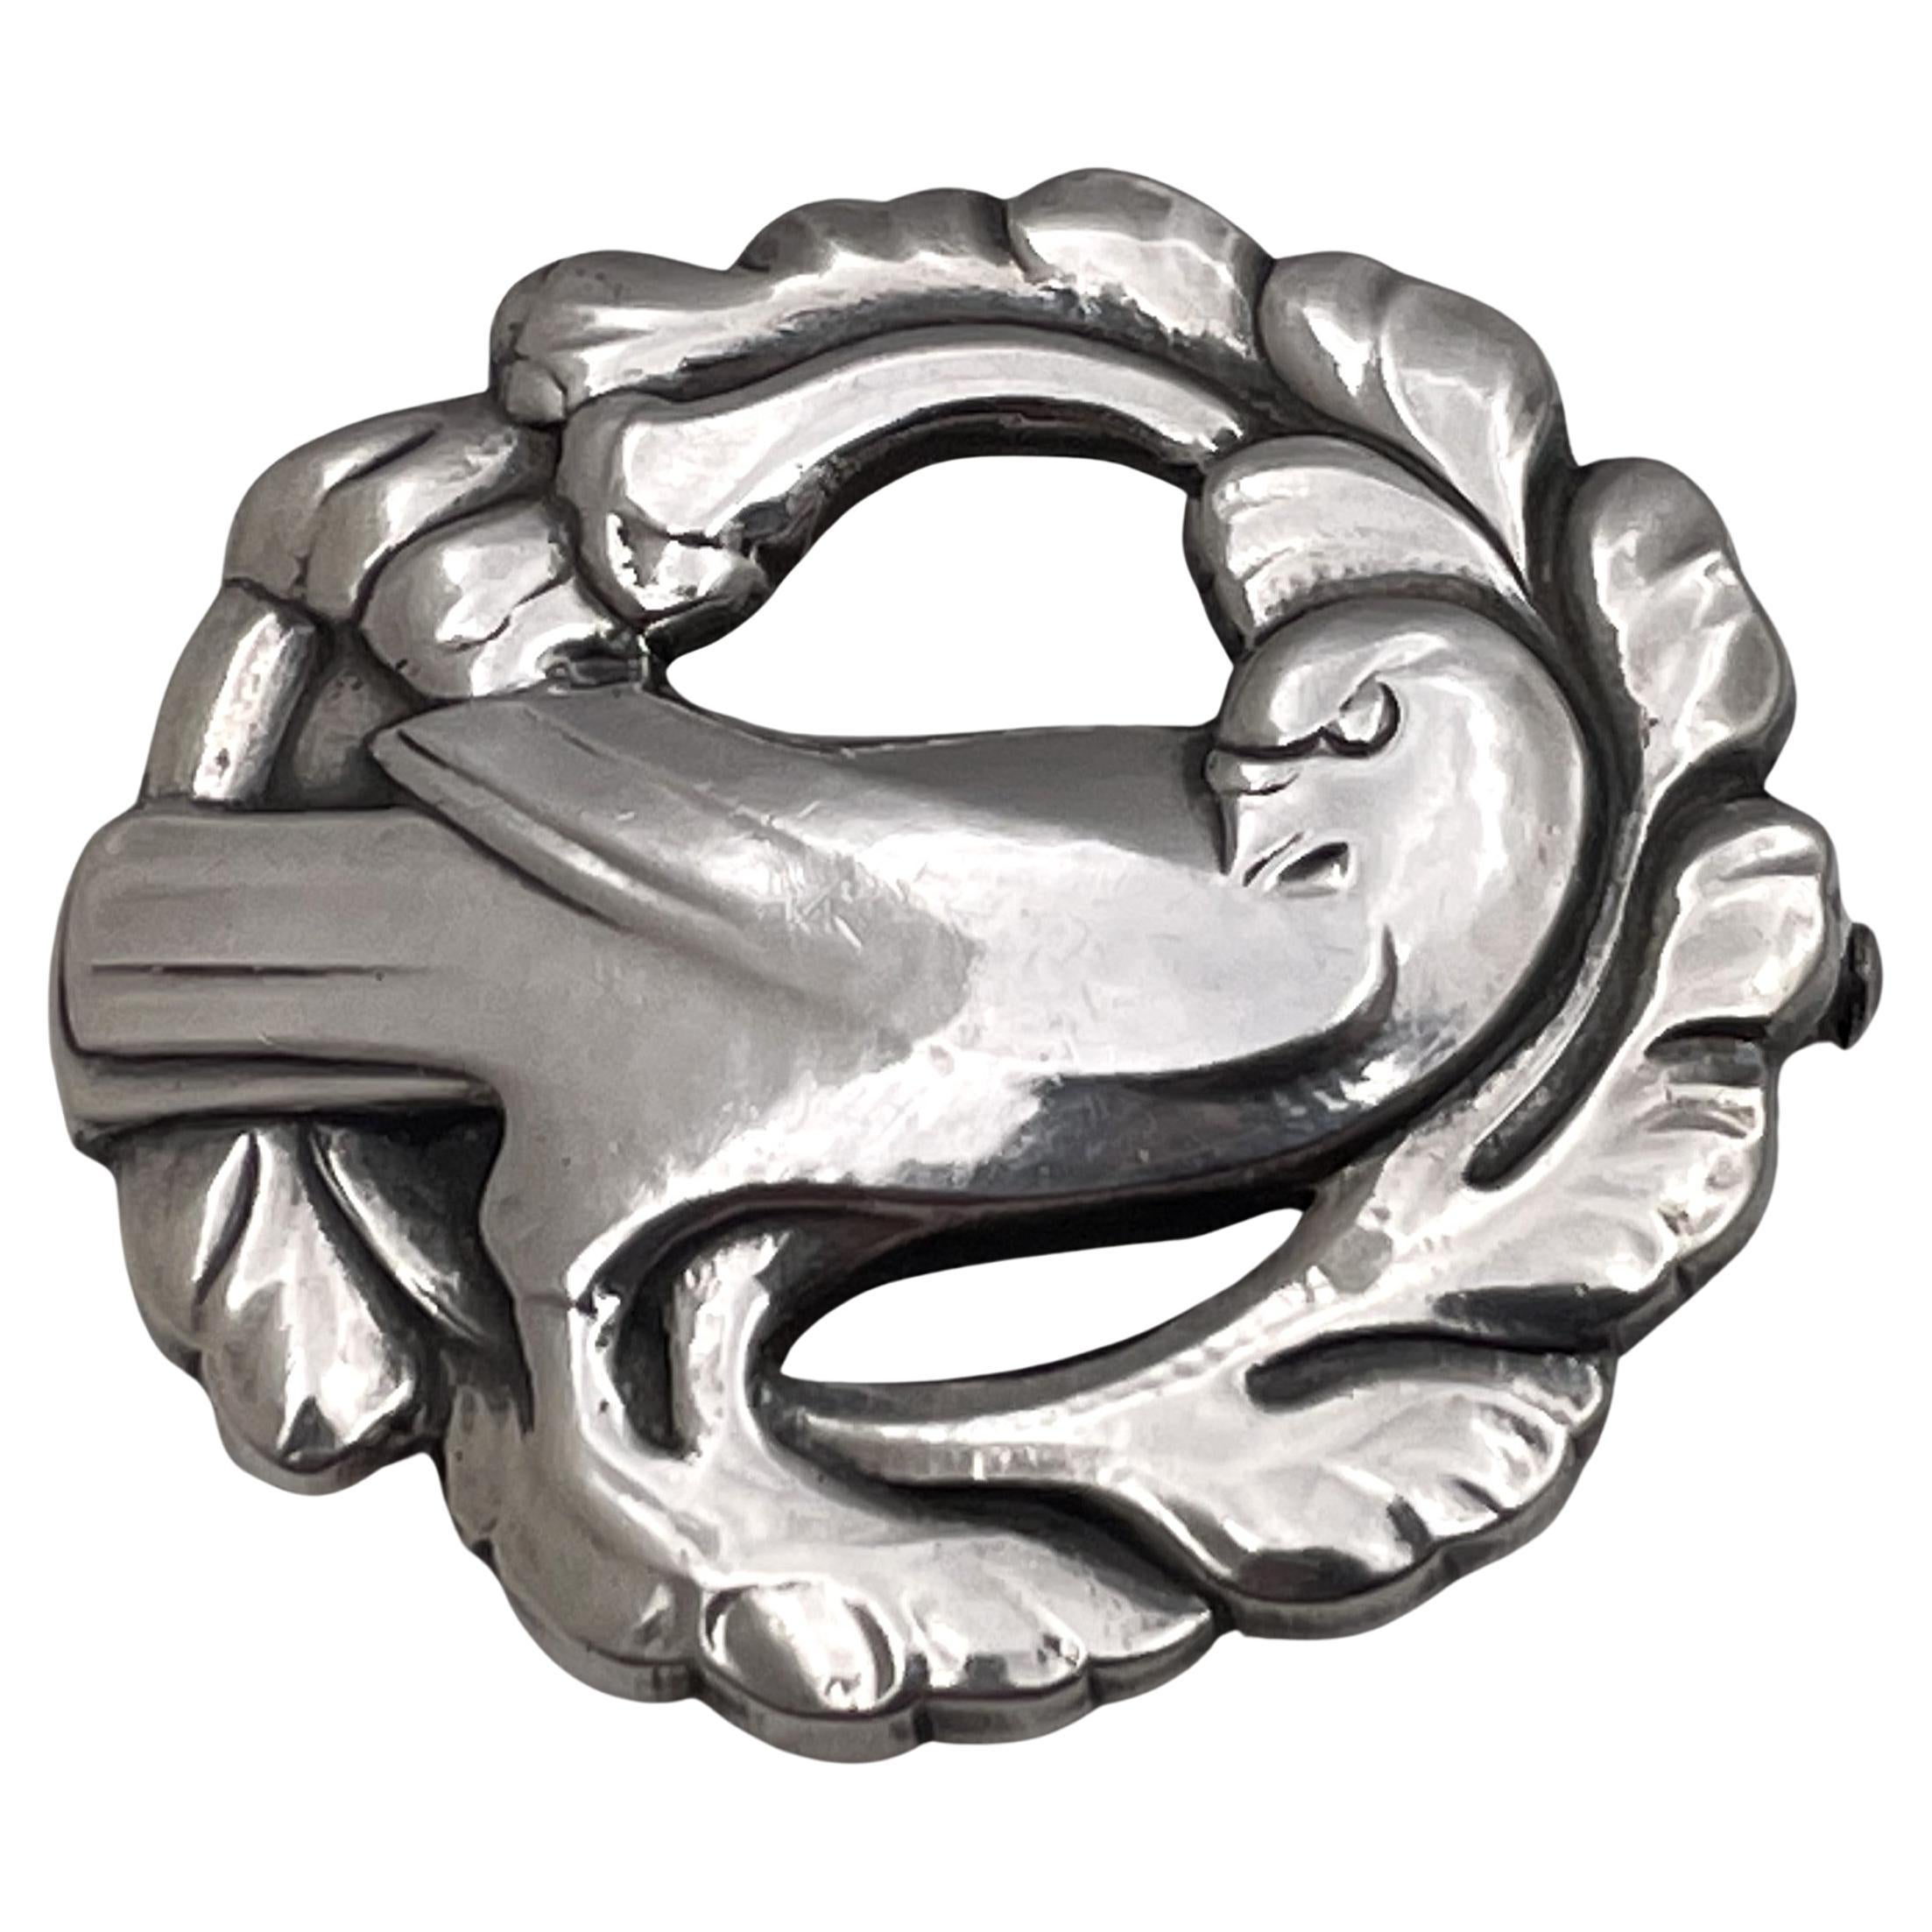 Georg Jensen Sterling Silver Hammered Brooch #165 with Bird from 1930s For Sale